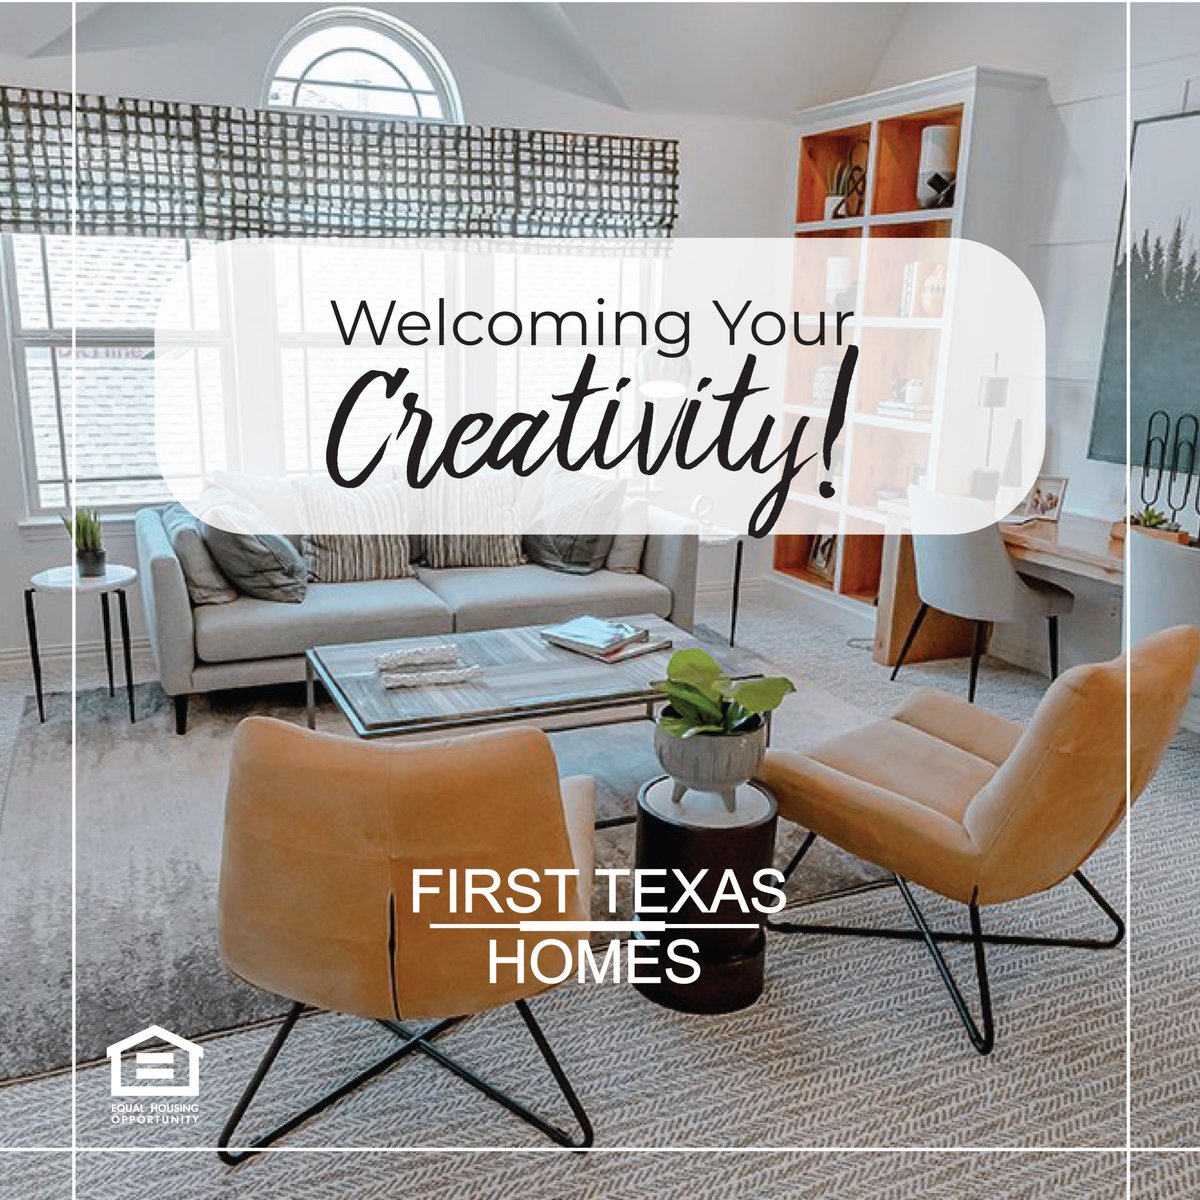 With First Texas Homes, you’ll get everything you’ve been looking for: quality, design flexibility, and the absolute best value.

 #dallashomebuilder #texashomebuilder #availablehomes #dallaslife #dallas #ftworth #dfw #dallashomes #dreamhome #dfwrealestate #dallasrealestate